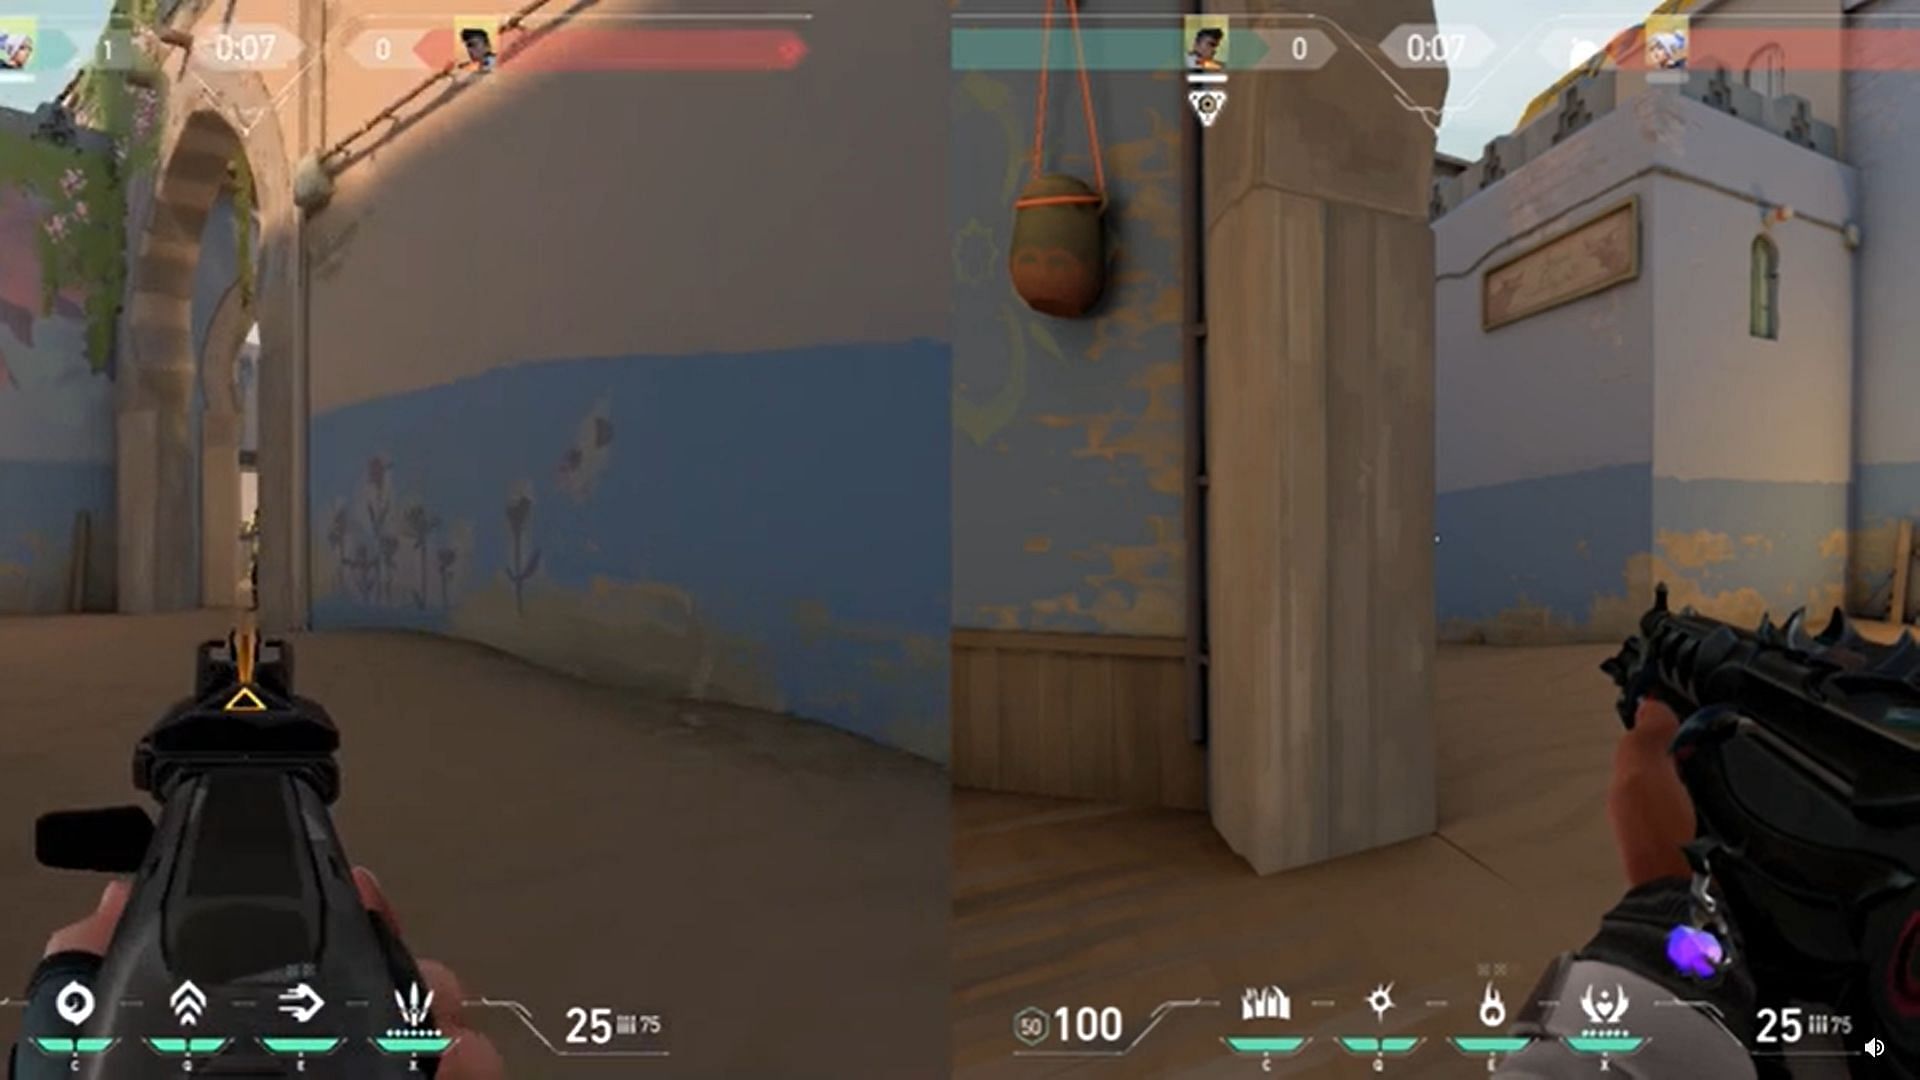 Perspective advantage in effect for the player (Screengrab via Reddit thread r/VALORANT)